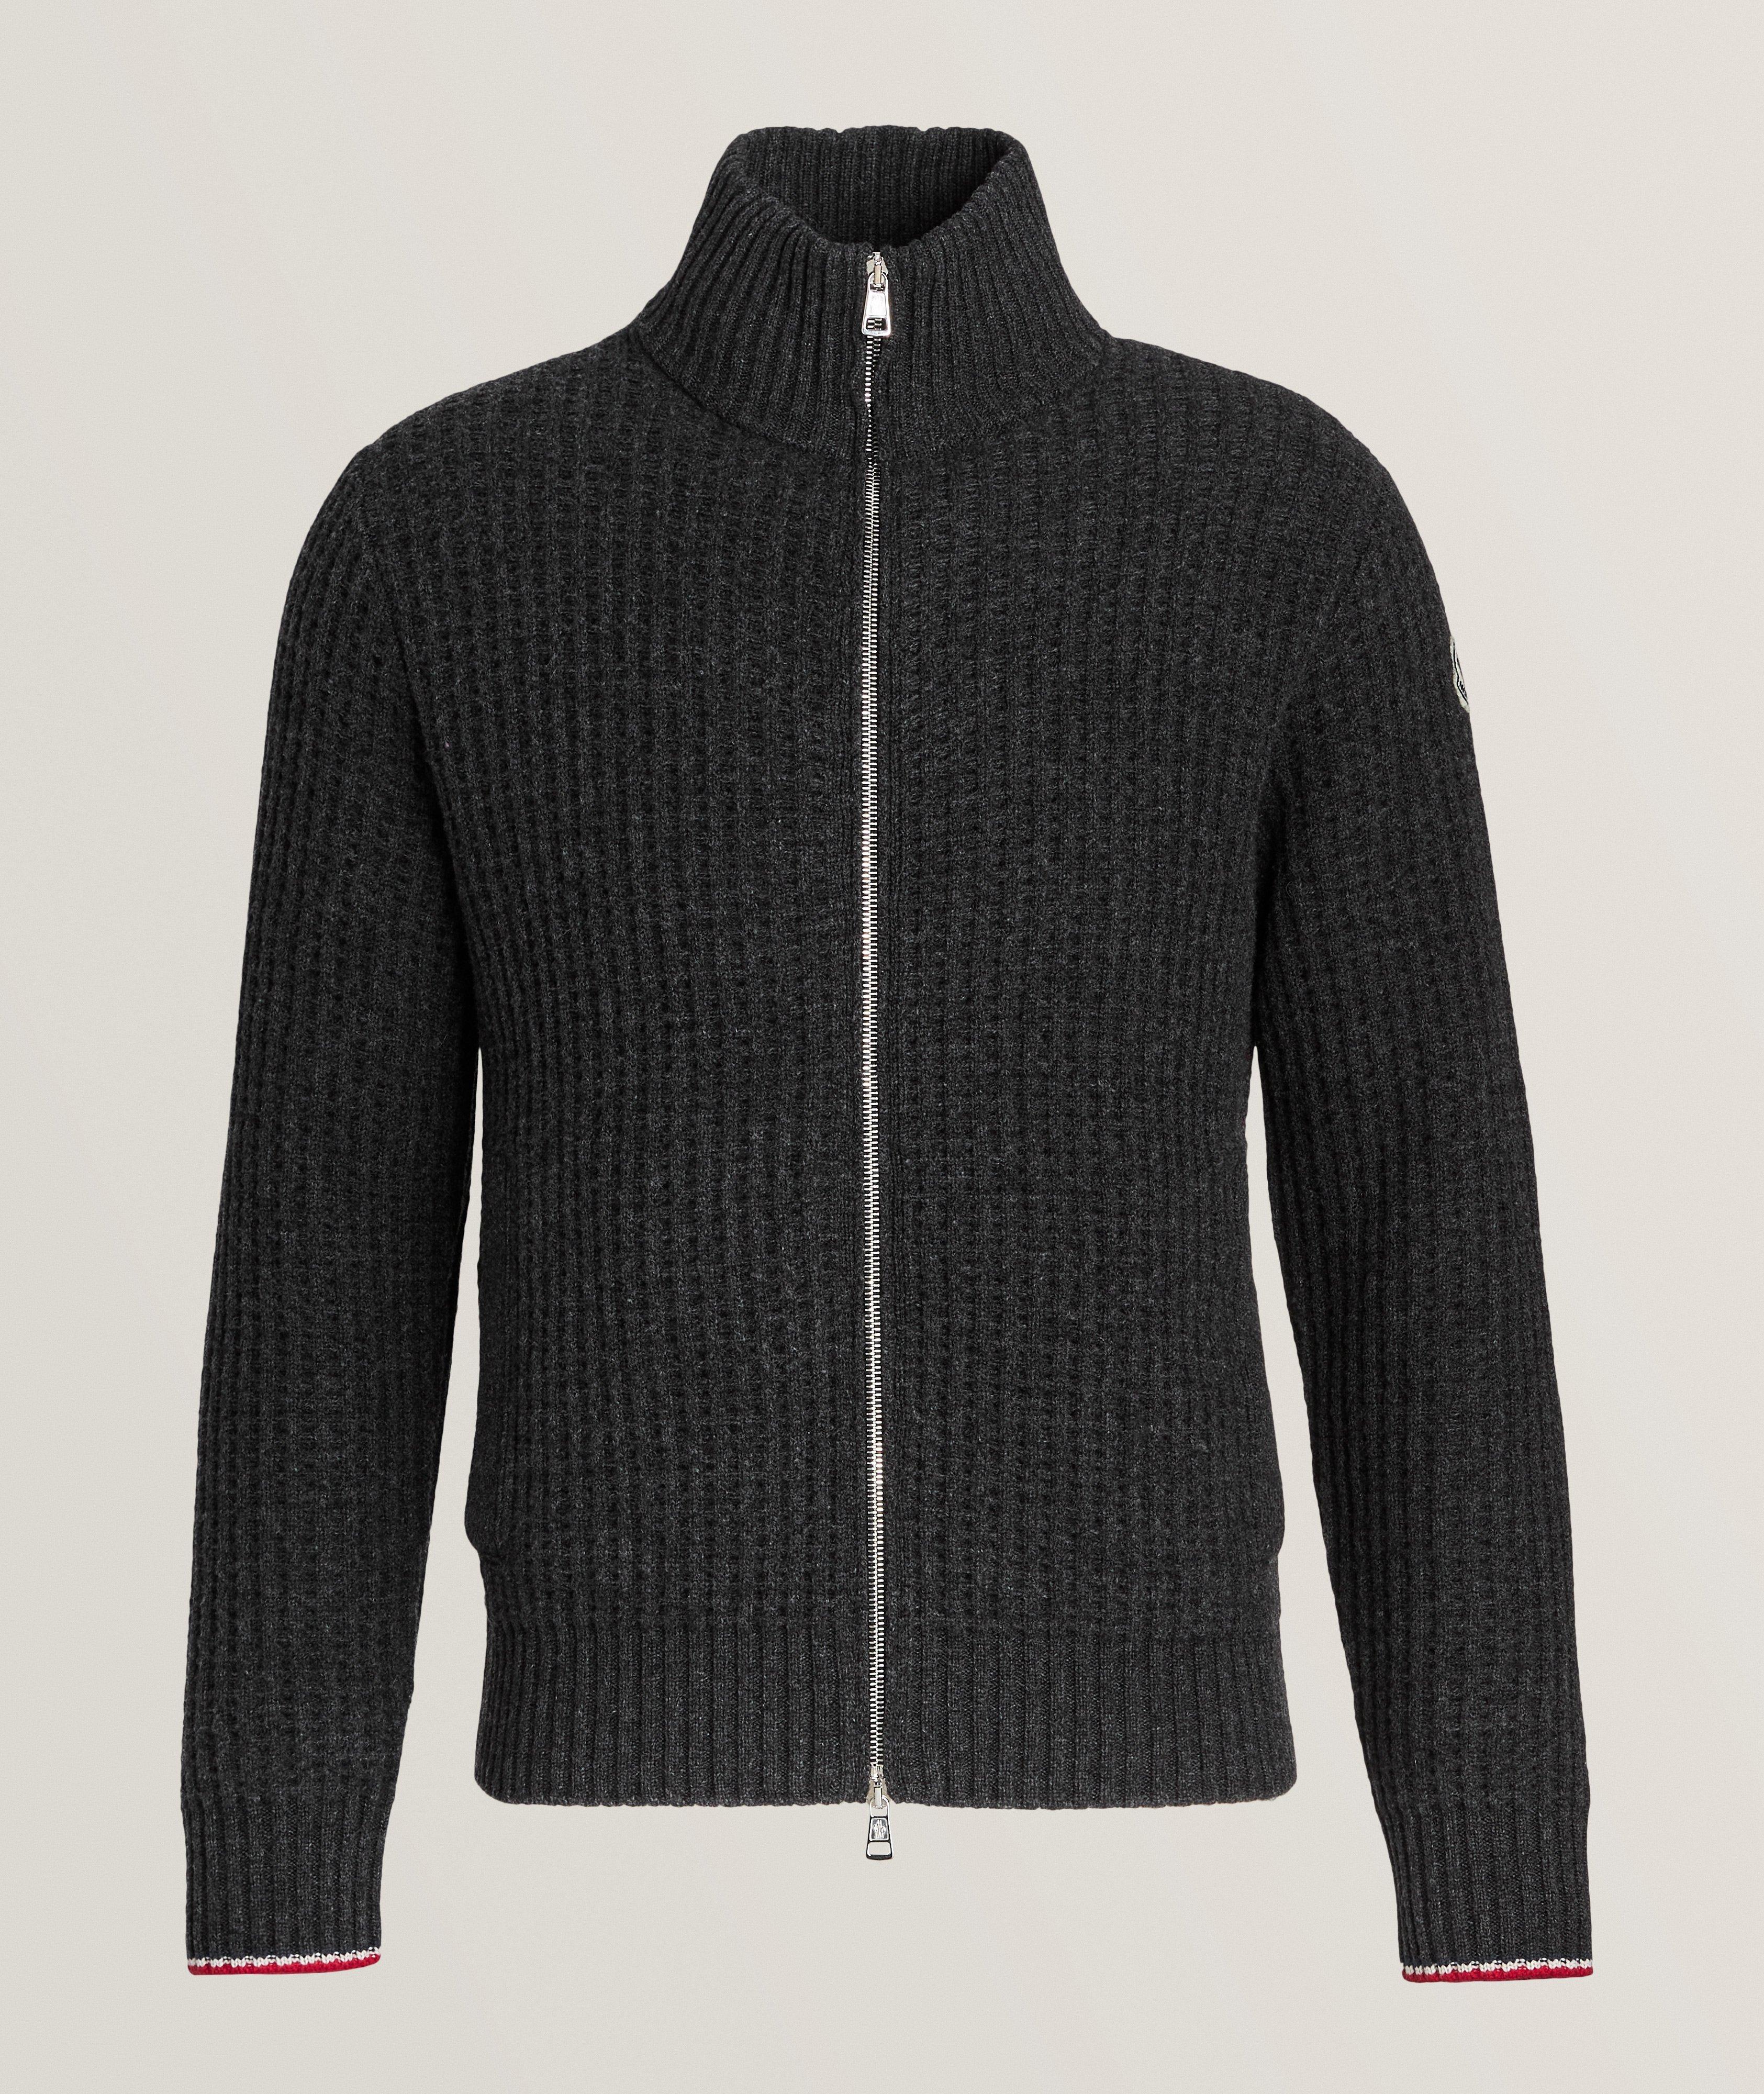 Ribbed Knit Wool-Cashmere Zip-Up Sweater image 0